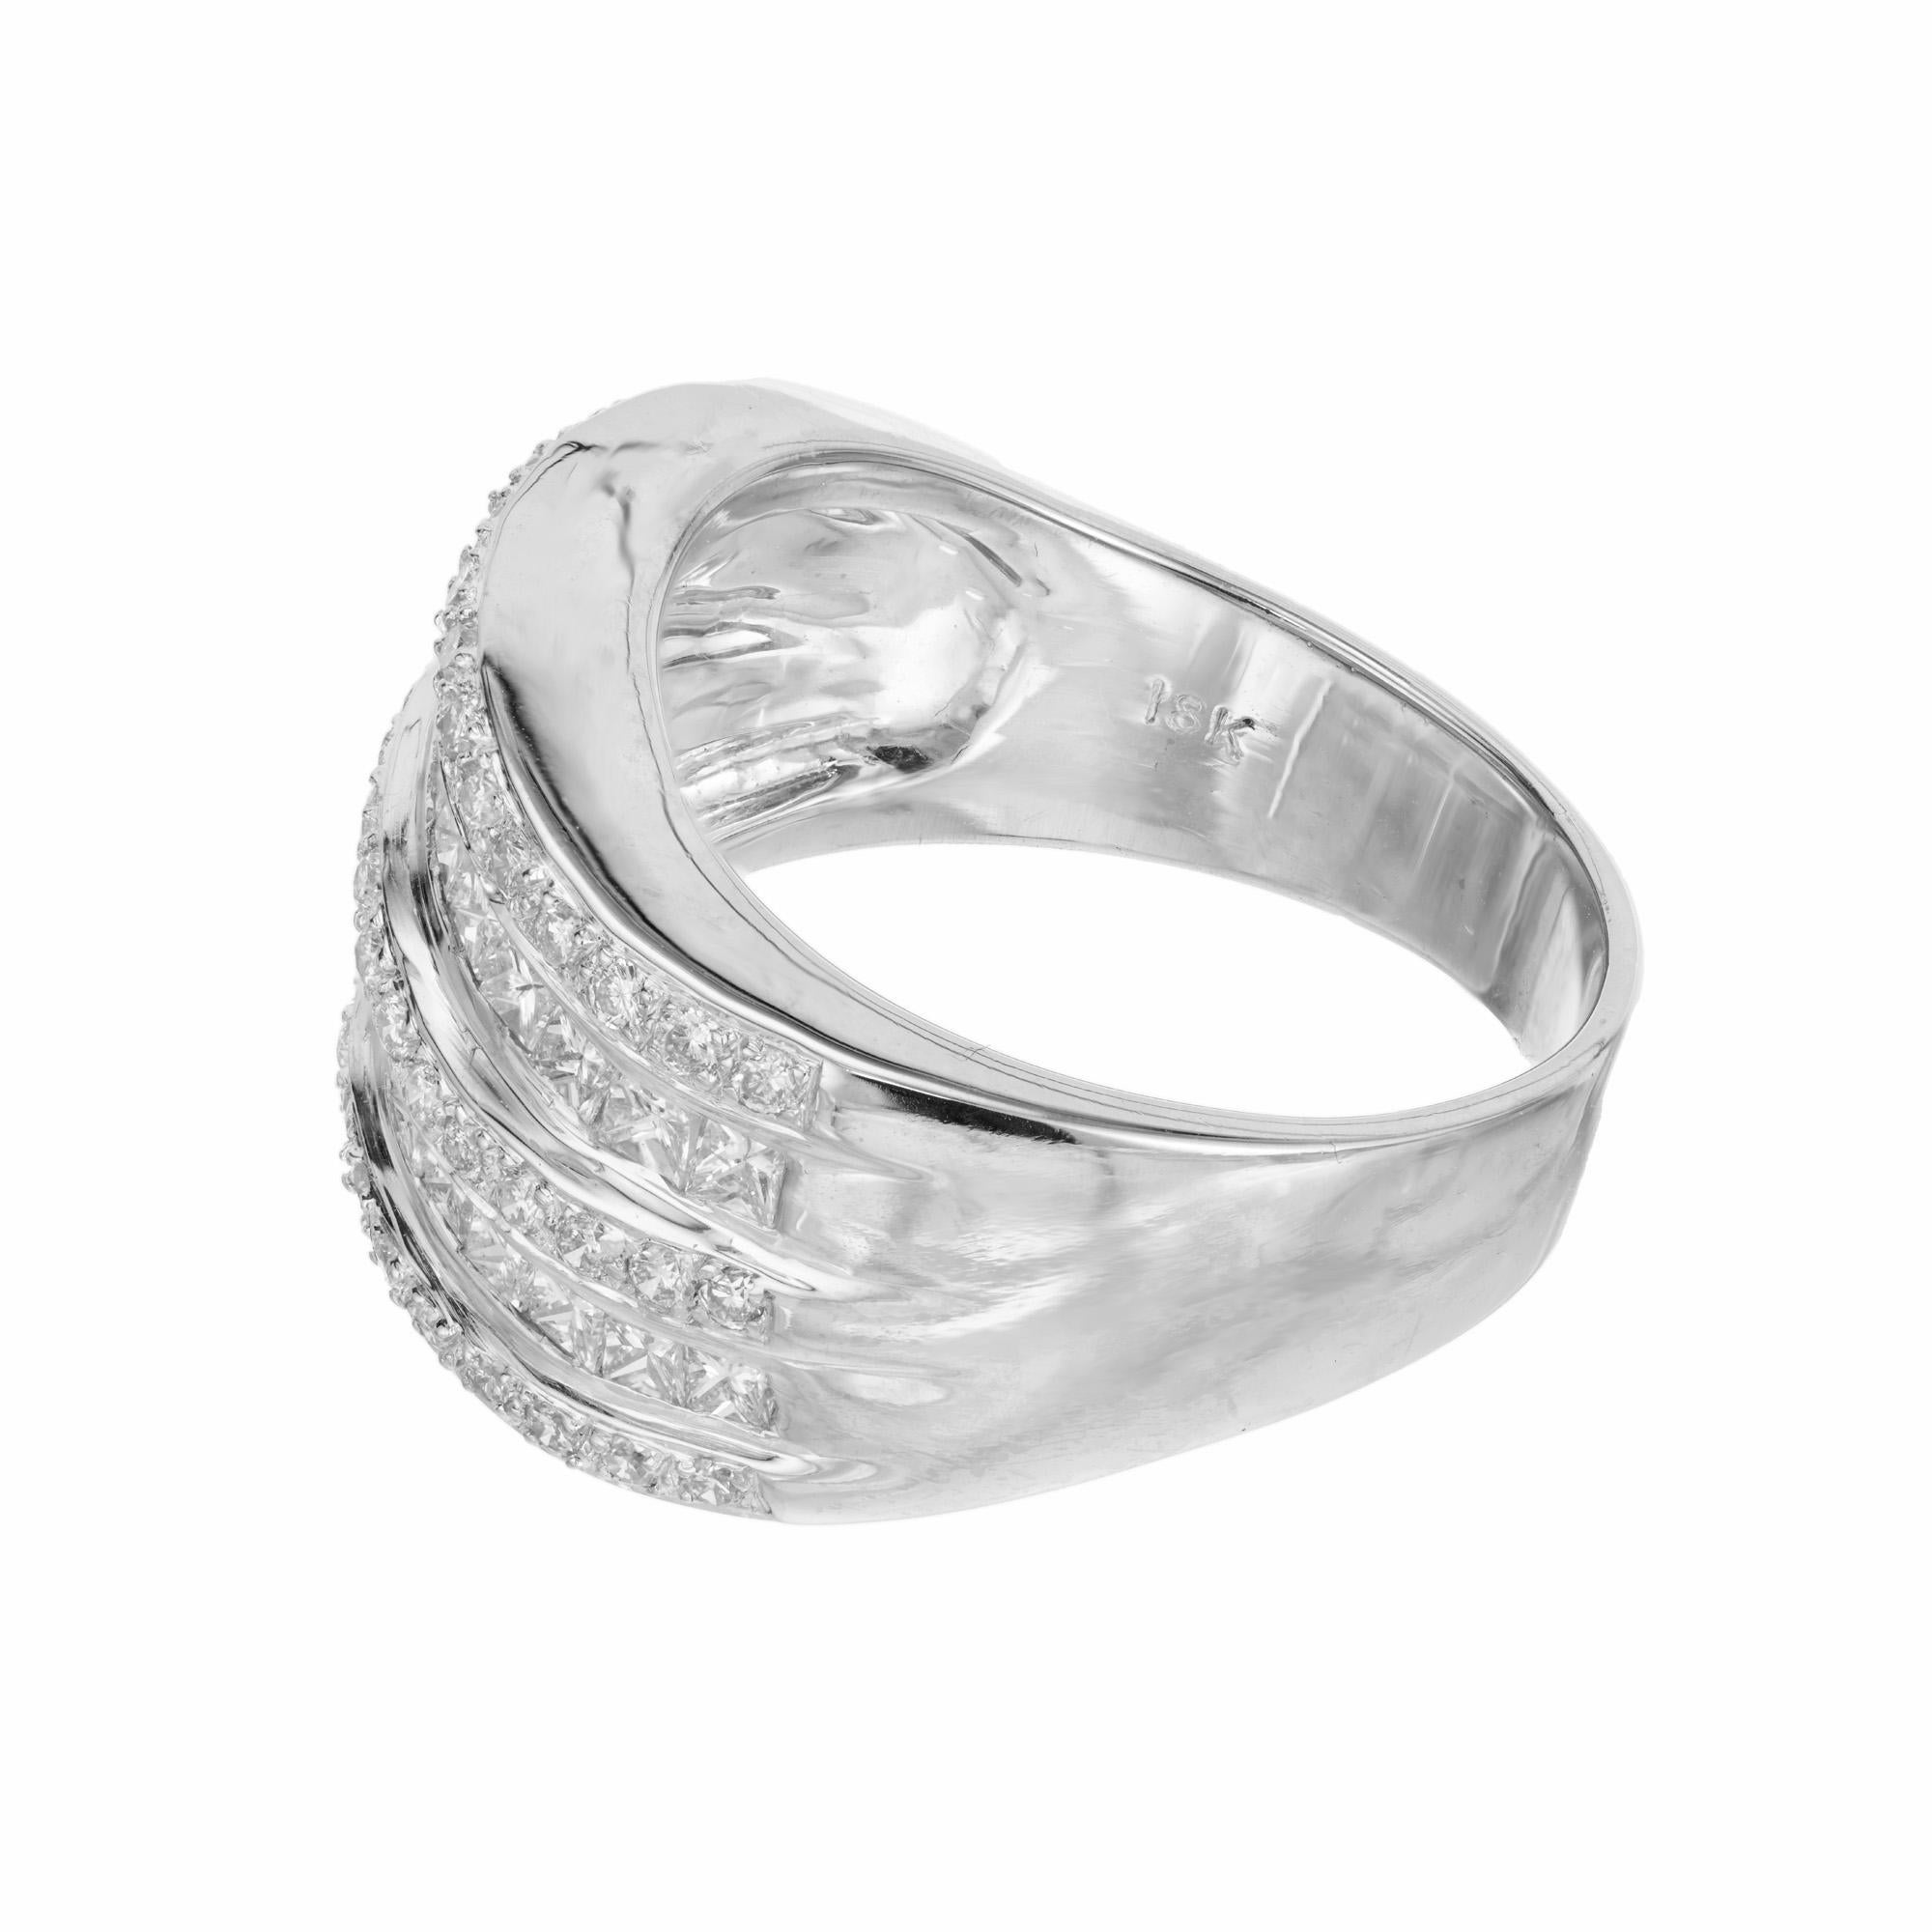 1.50 Carat Diamond White Gold Five Row Wide Swirl Cocktail Ring In Good Condition For Sale In Stamford, CT